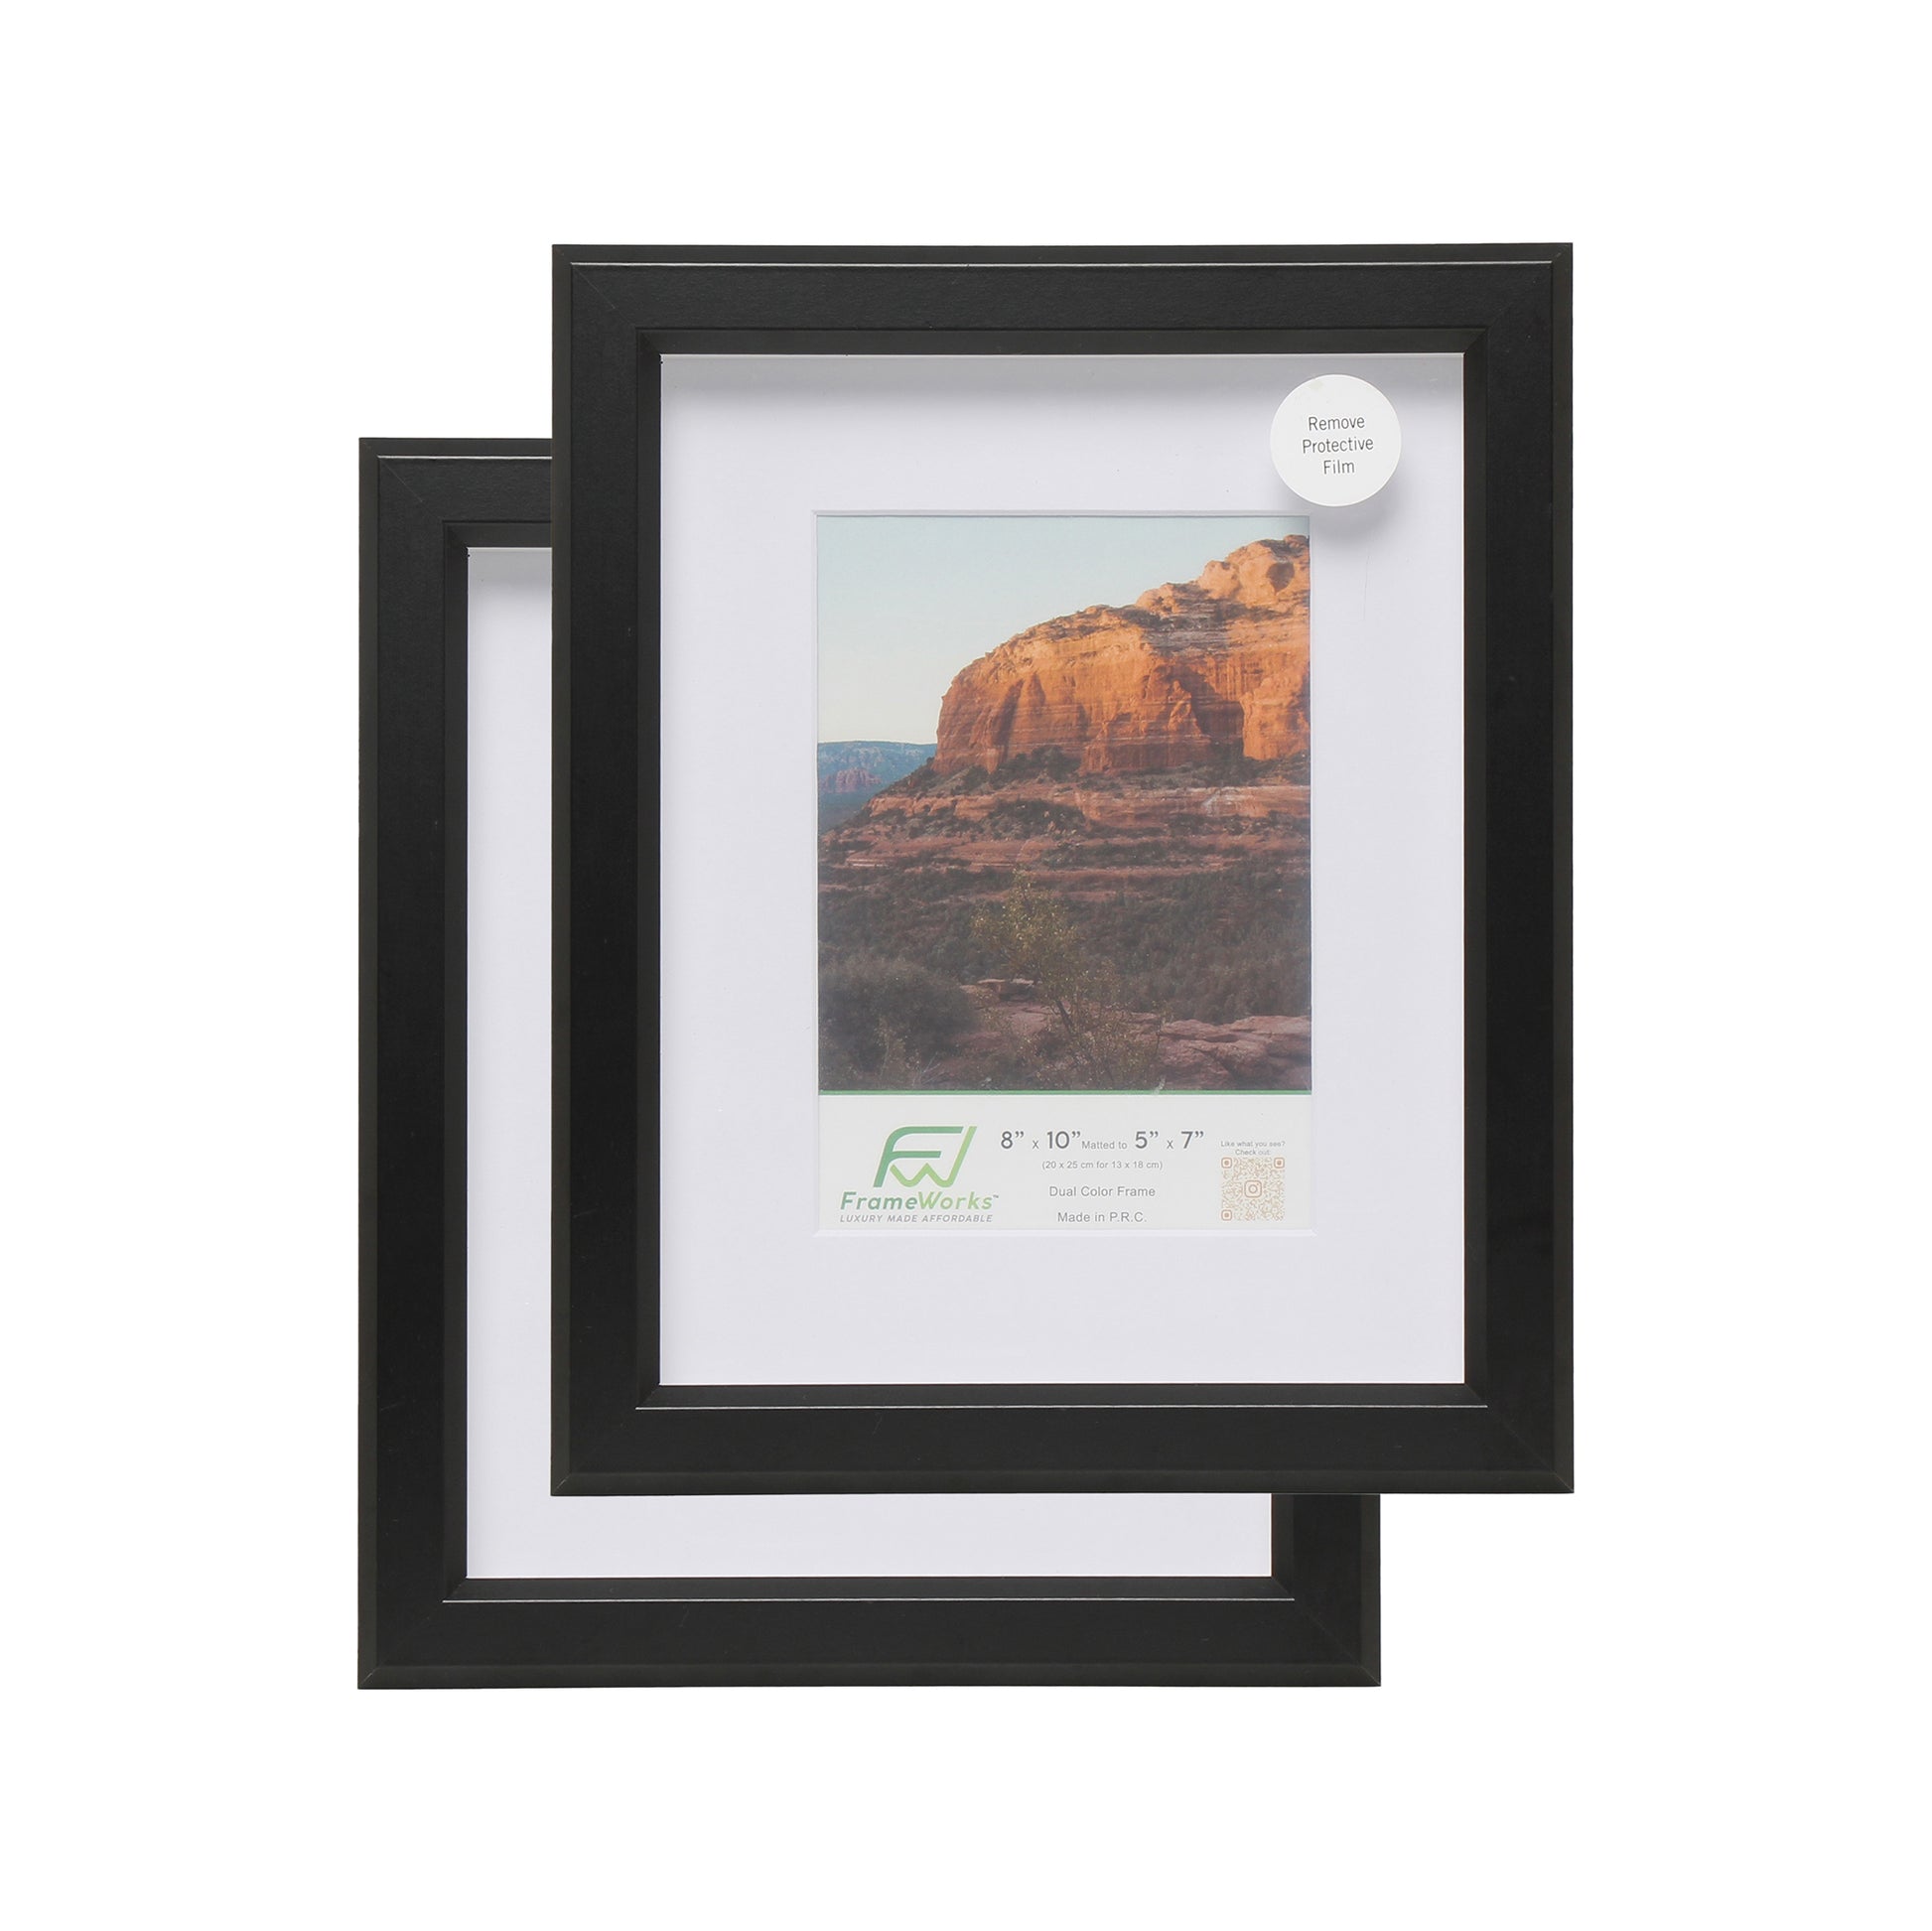 8" x 10" Black Wood 2-Pack Gunnabo Picture Frames, 5" x 7" Matted